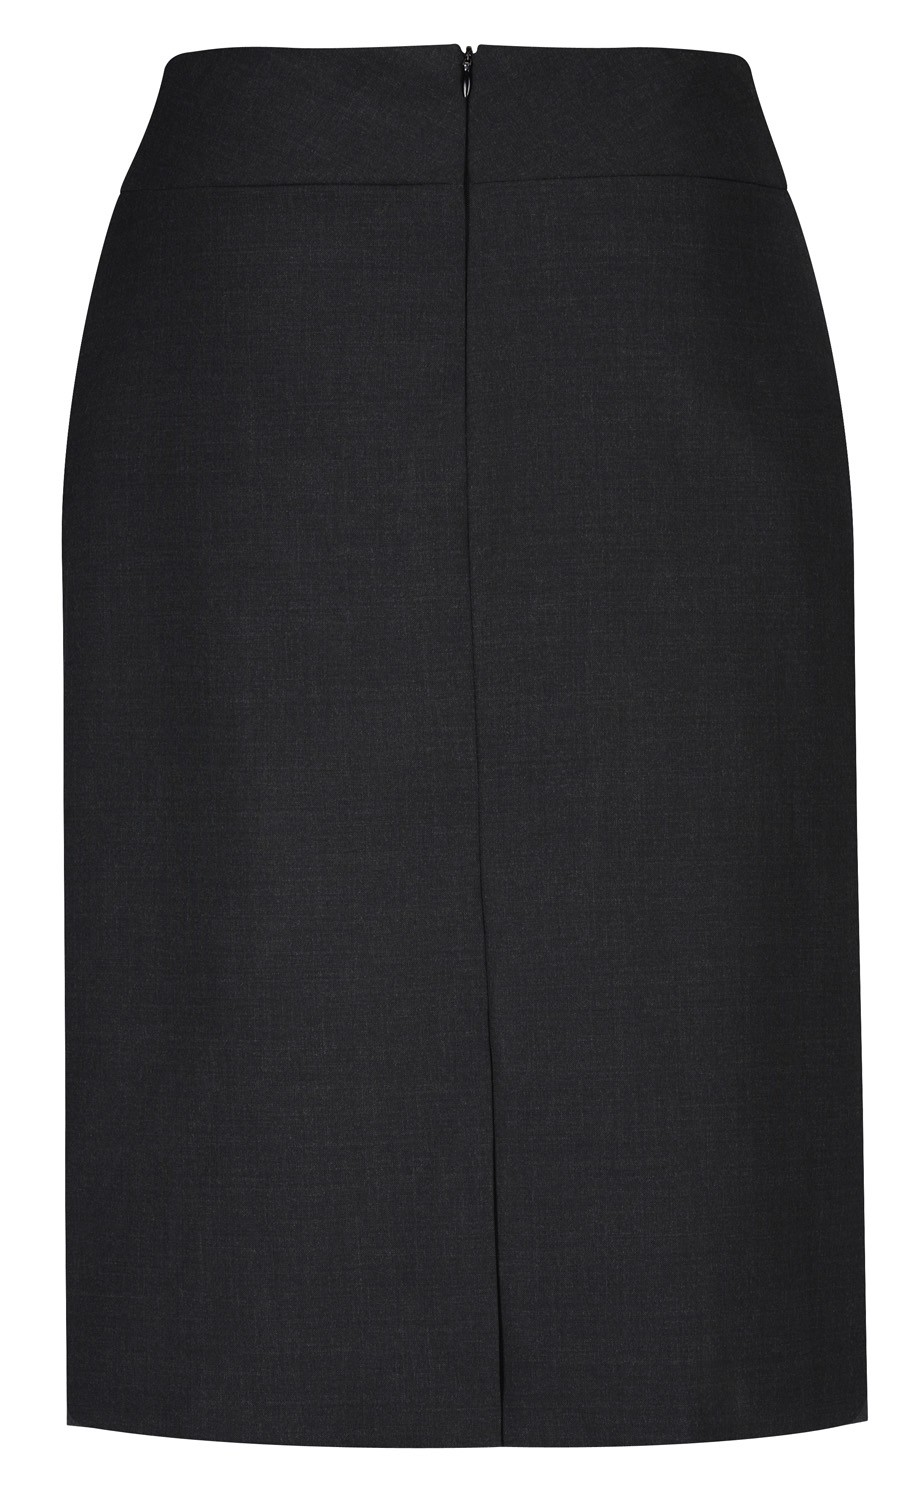 Buy Relaxed Fit Skirt - Wool Stretch in NZ | The Uniform Centre